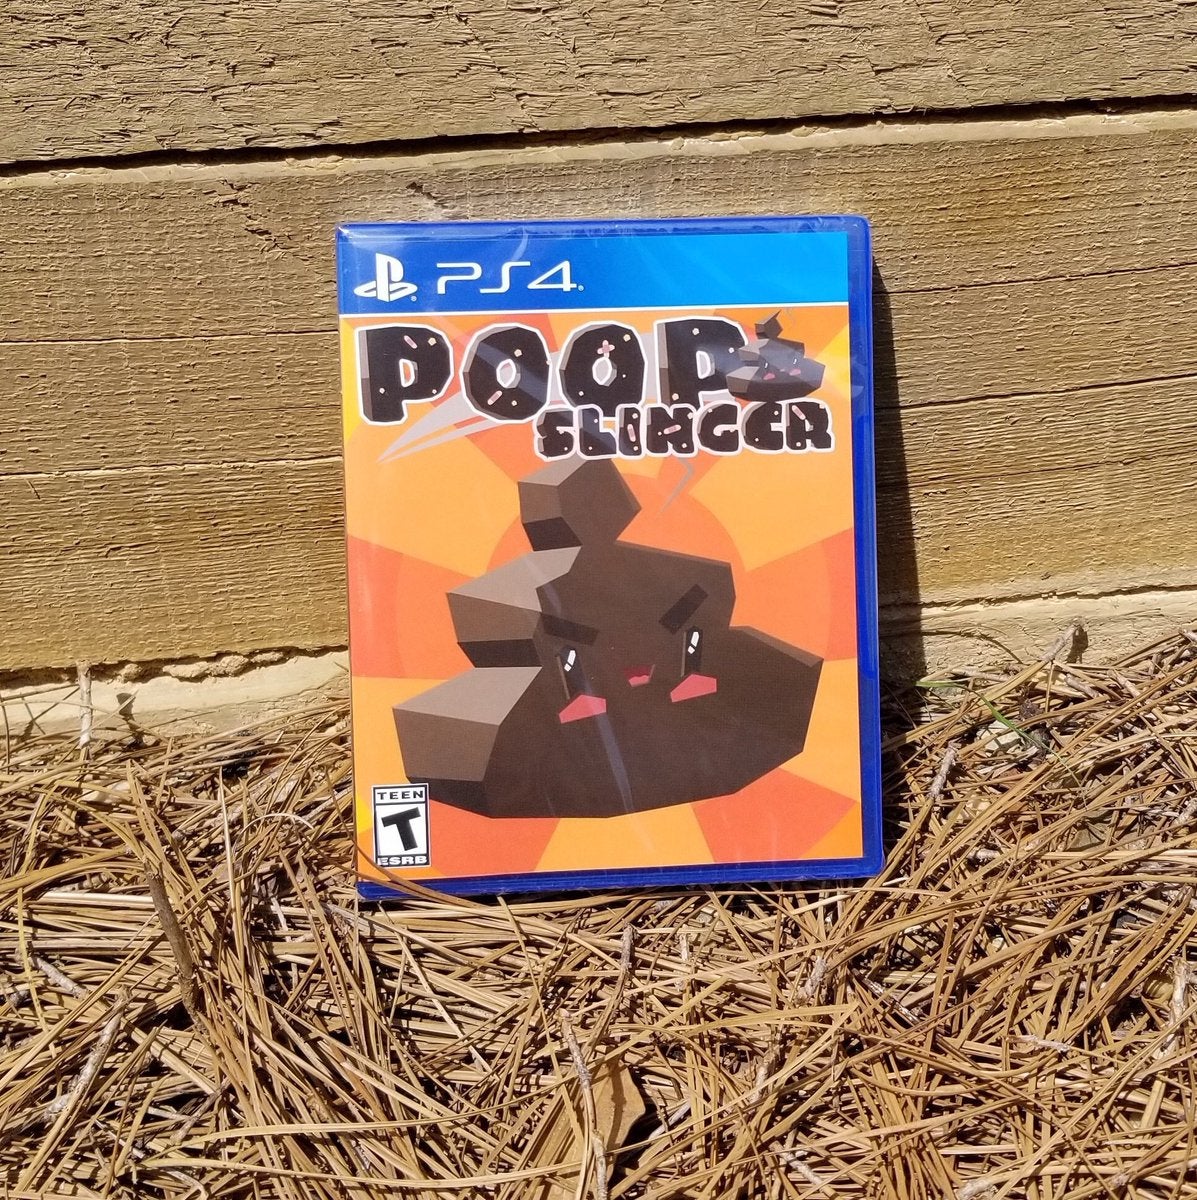 Image for The rarest PS4 game is called Poop Slinger - and it supposedly bankrupted a company